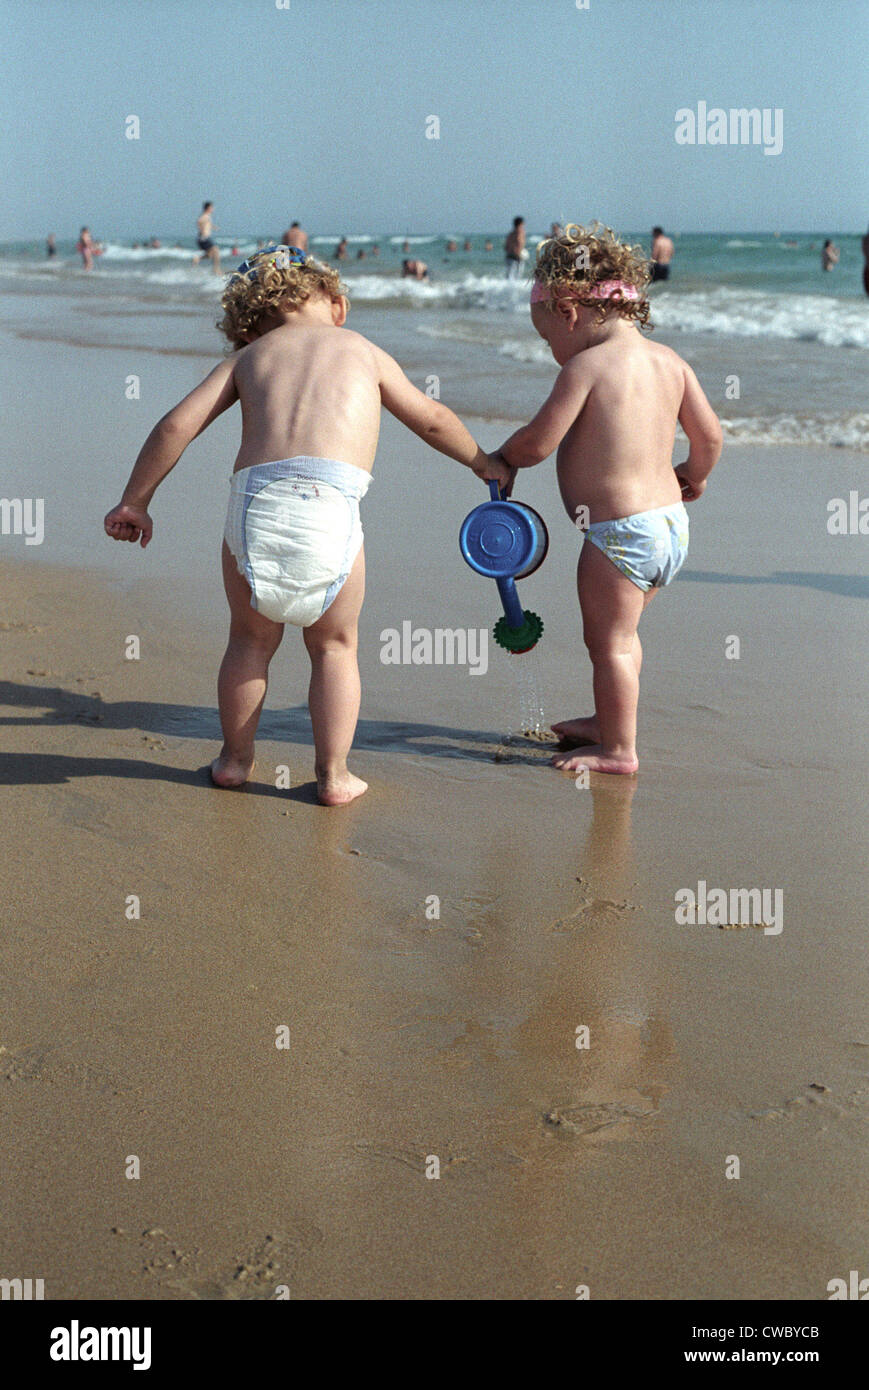 Little boy and little girl playing together on beach Stock Photo